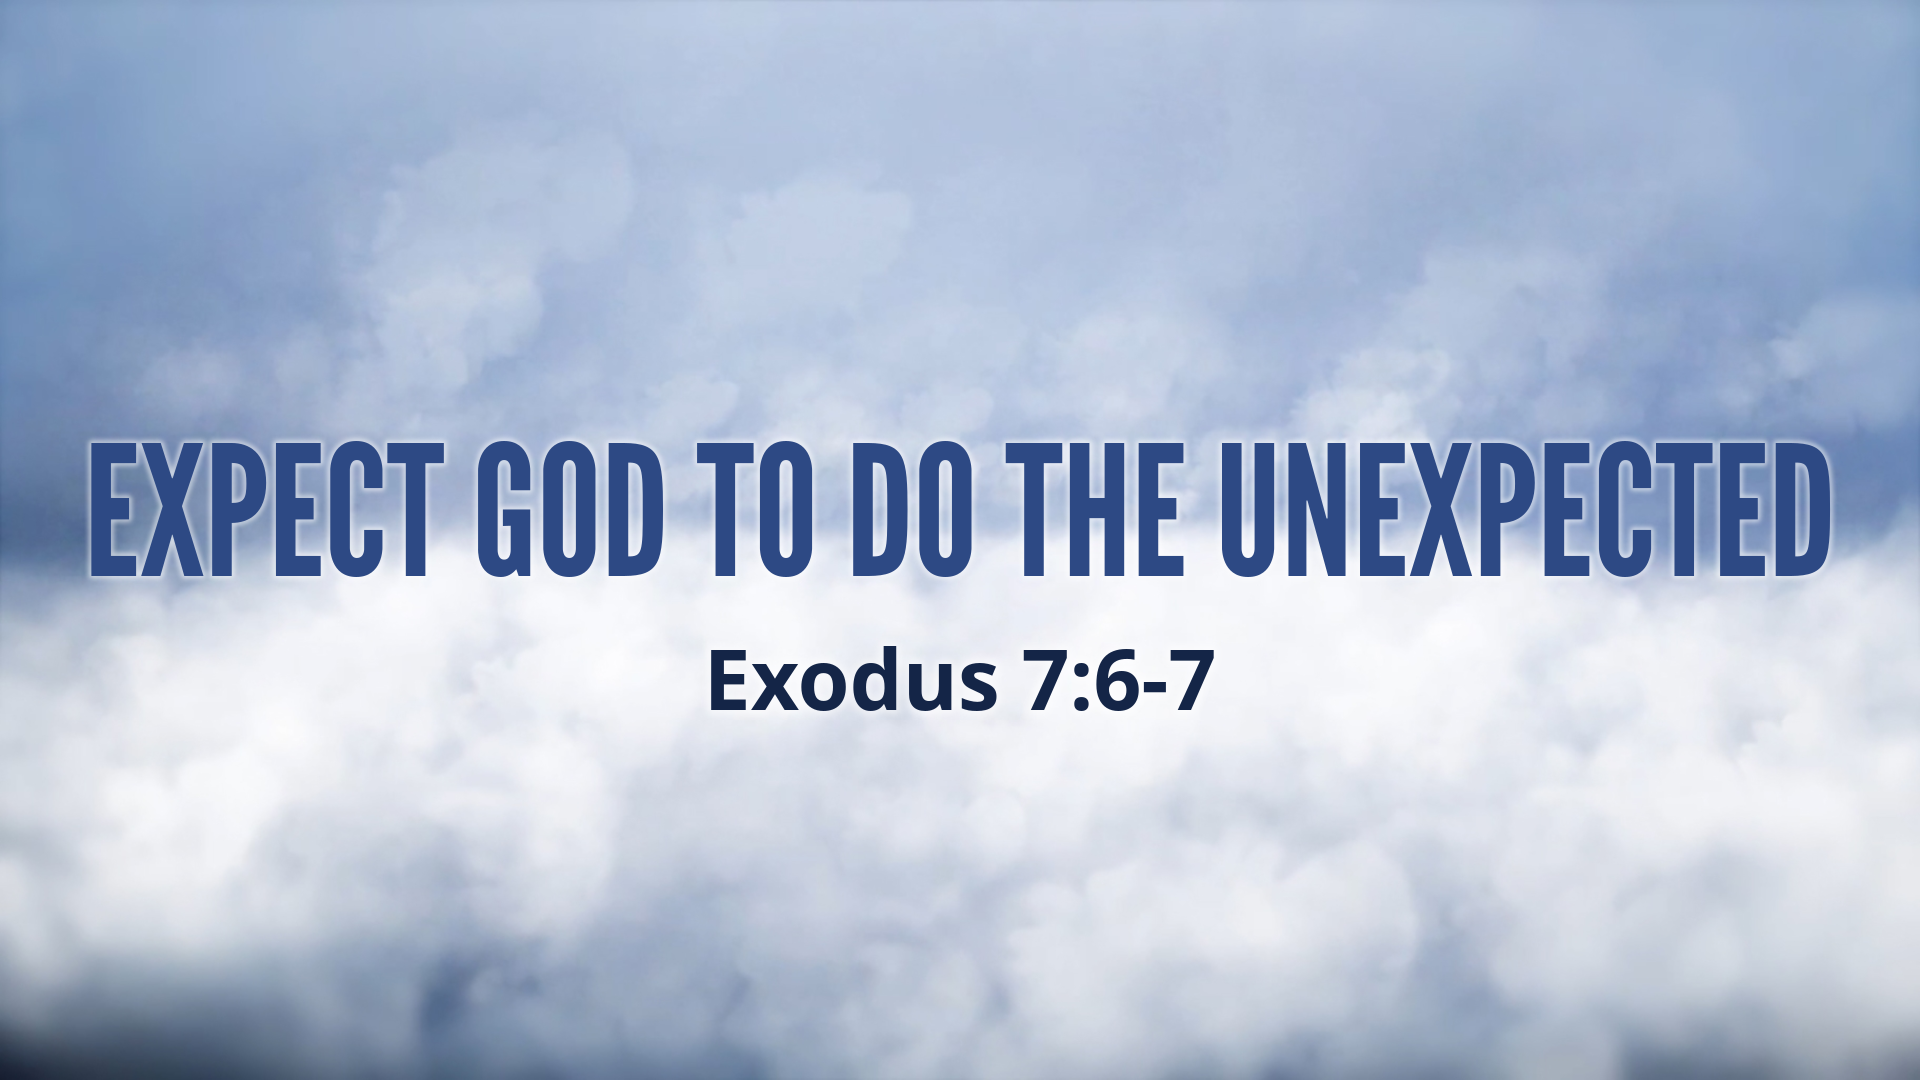 Expect God to Do the Unexpected